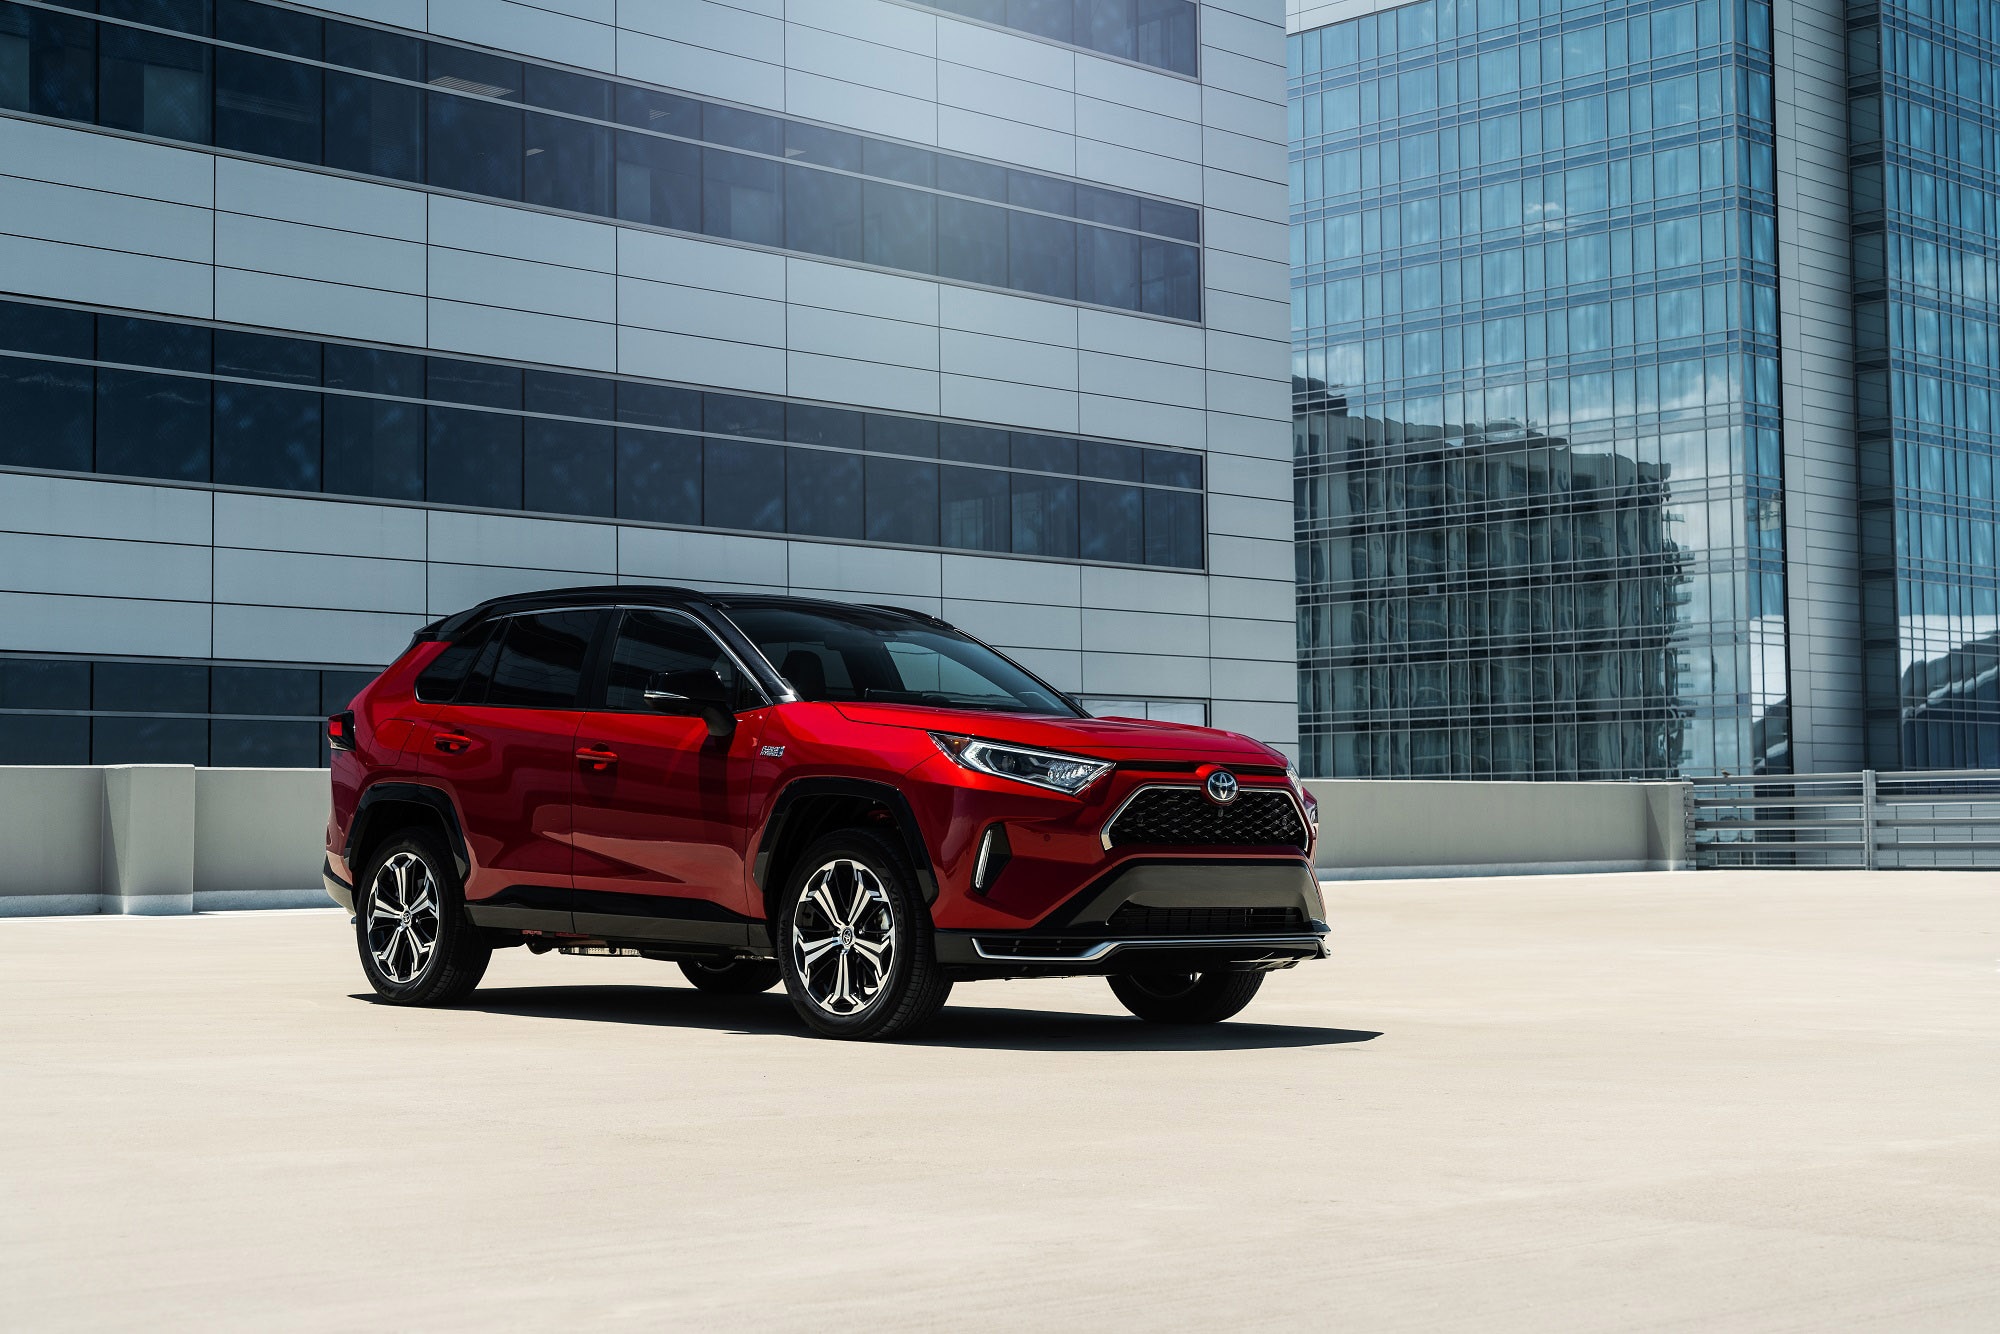 2023 Toyota RAV4 Prime XSE in Supersonic Red with the Midnight Black Metallic roof.